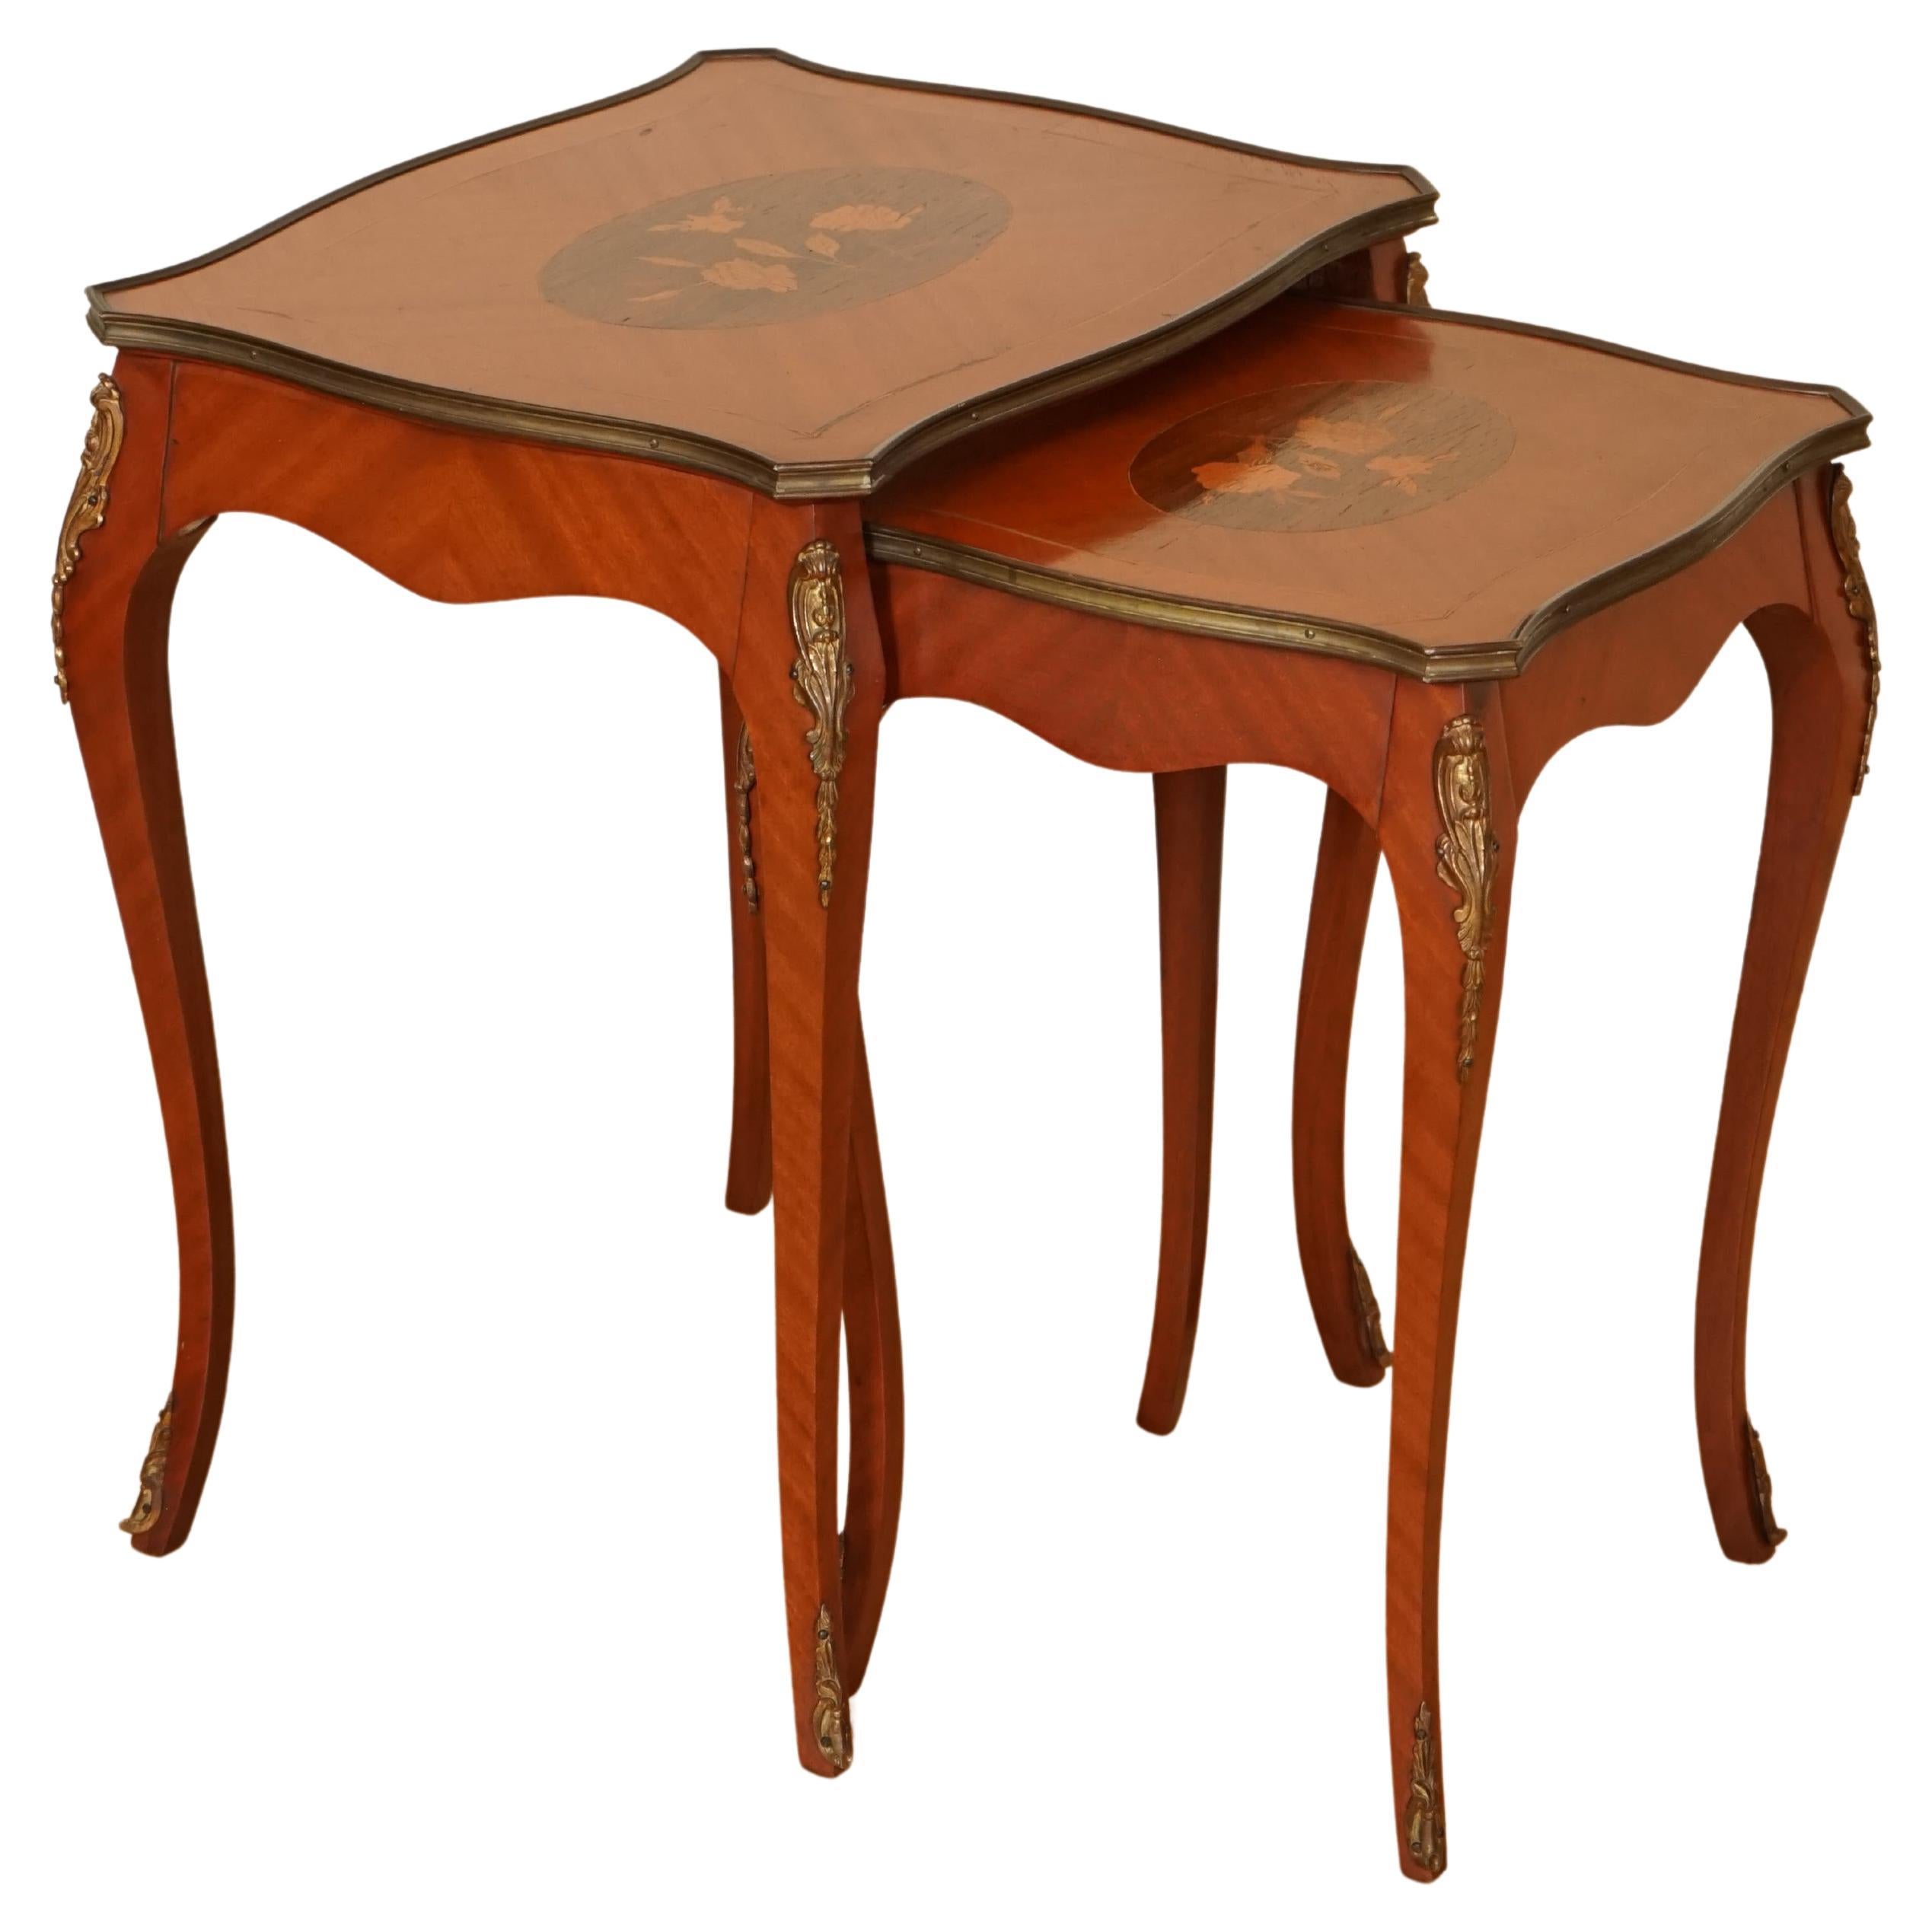 Lovely Vintage French Inlaid Parquetry Set of 2 Nesting Tables